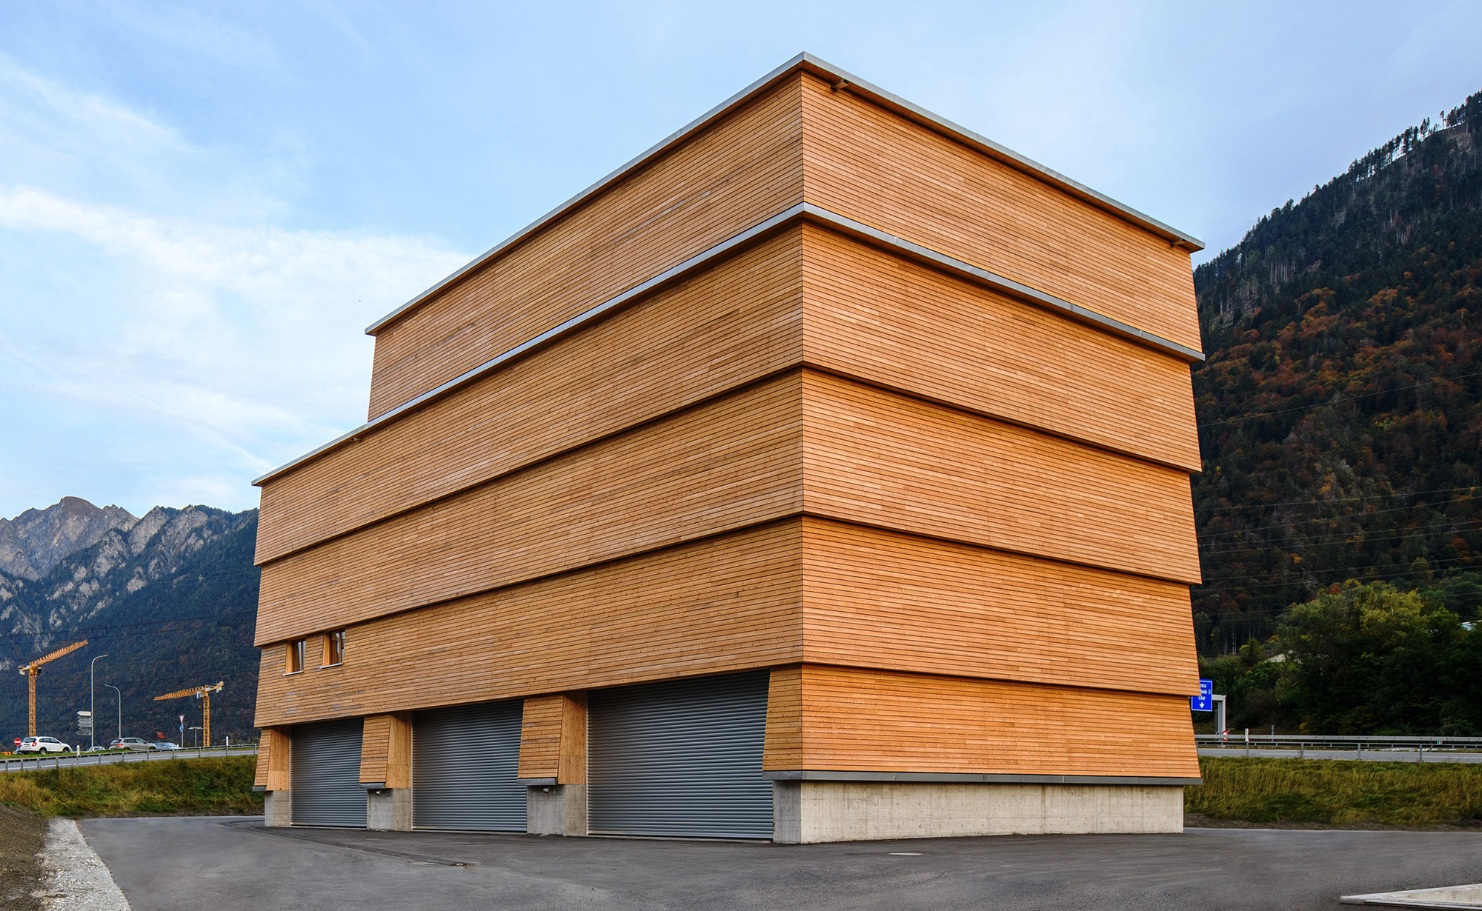 Largest modular silo facility made of wood with a storage volume of 2'300m3 salt in Chur